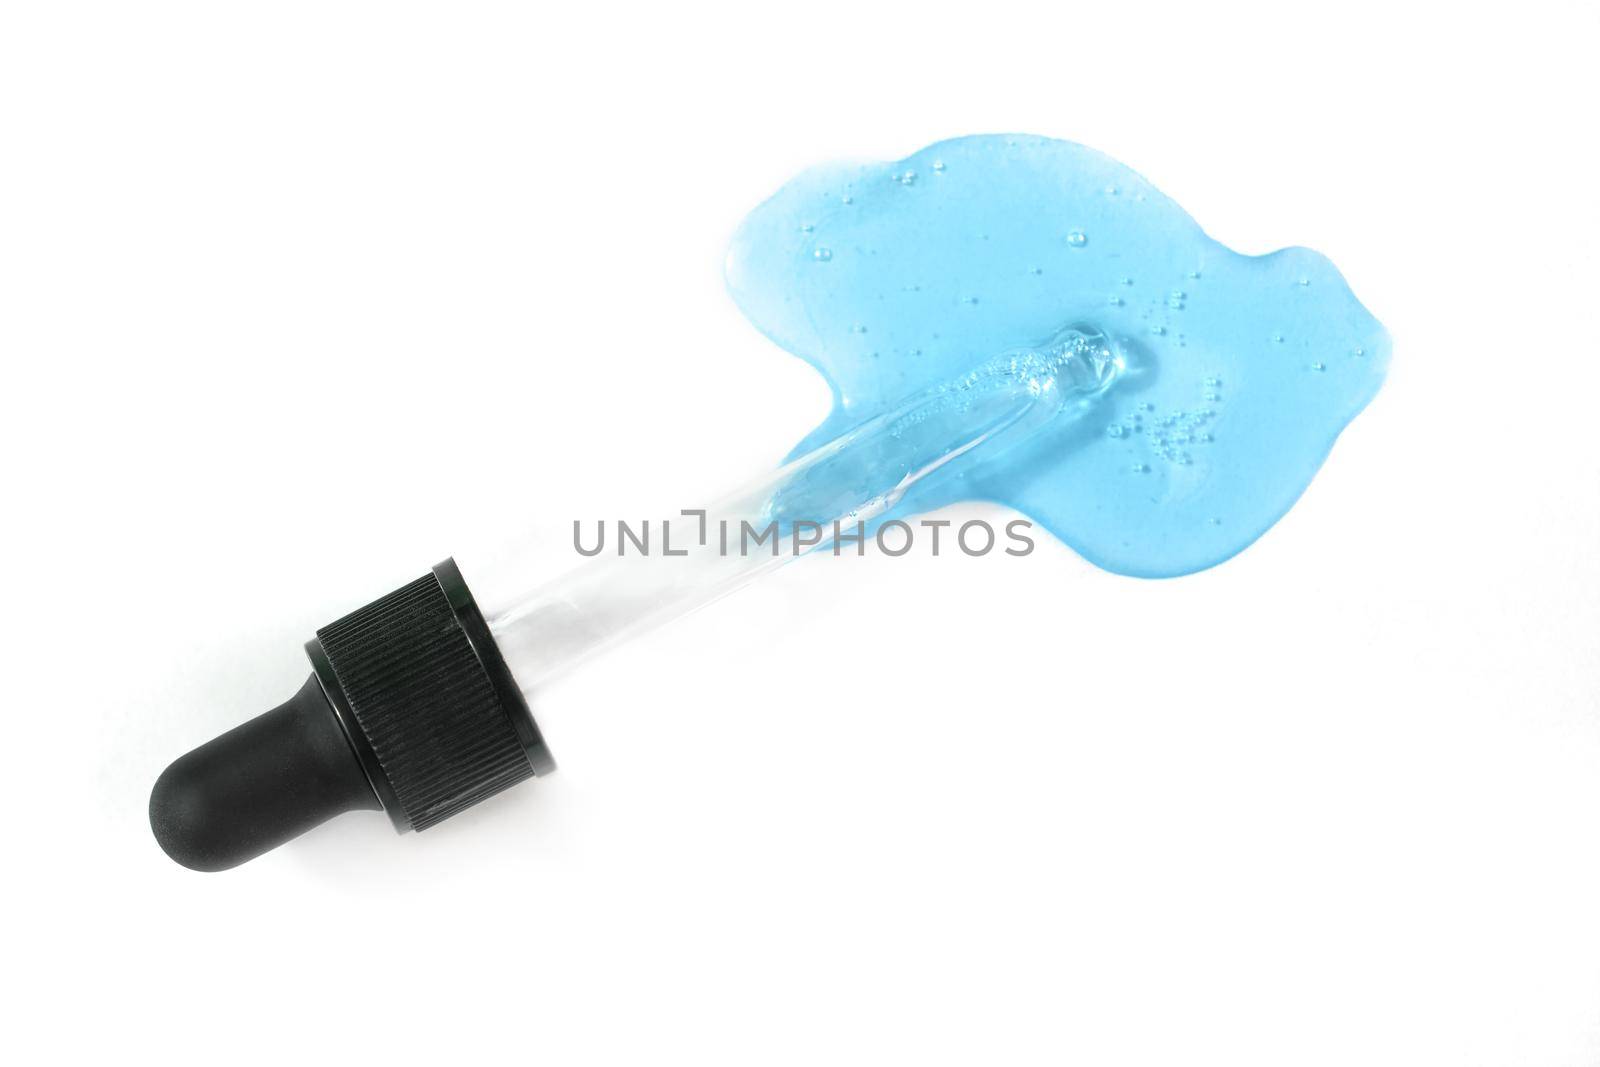 Pipette with blue hyaluronic acid isolated on white background. Cosmetics and healthcare concept closeup. Dose of serum or retinol with air bubbles. Top view. Luxury gel or beauty product presentation